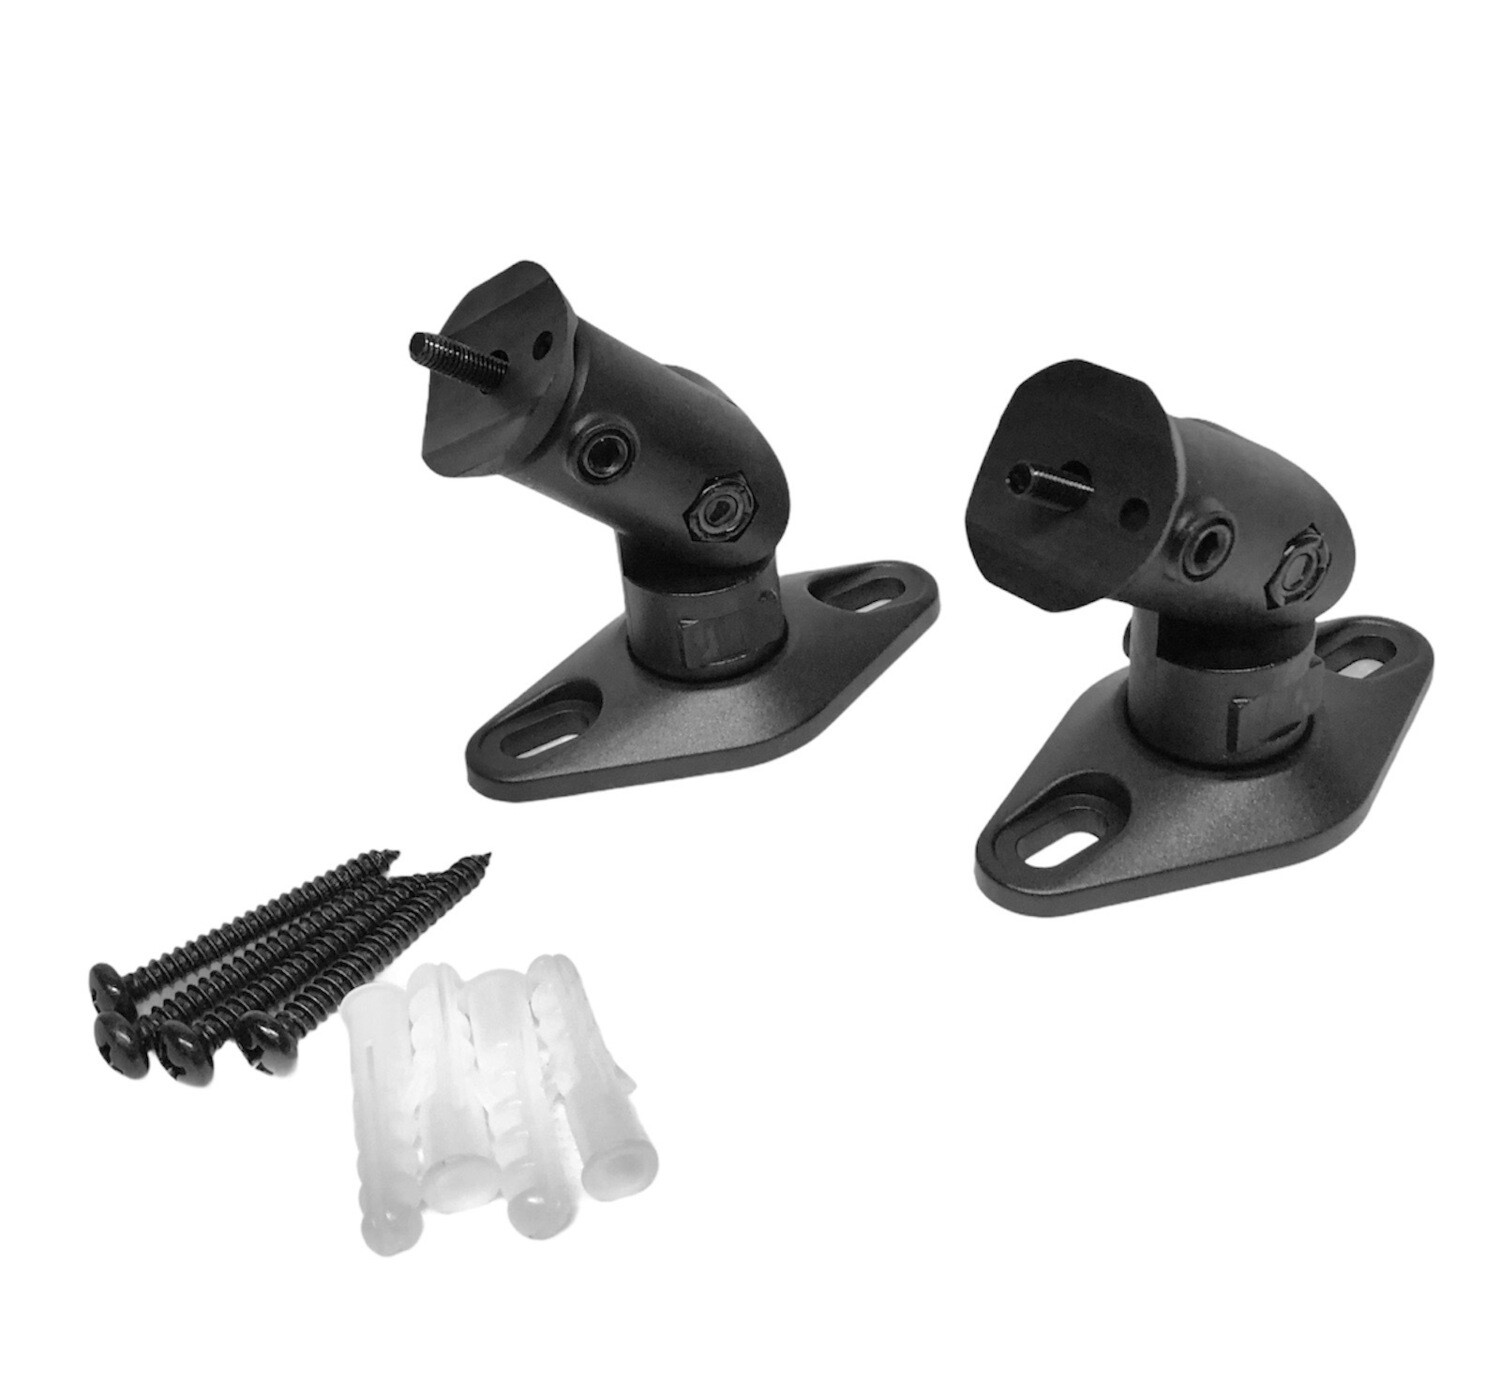 Wall Mount Stand Brackets for Bose Lifestyle V35 V30 Jewel Speakers - Pair